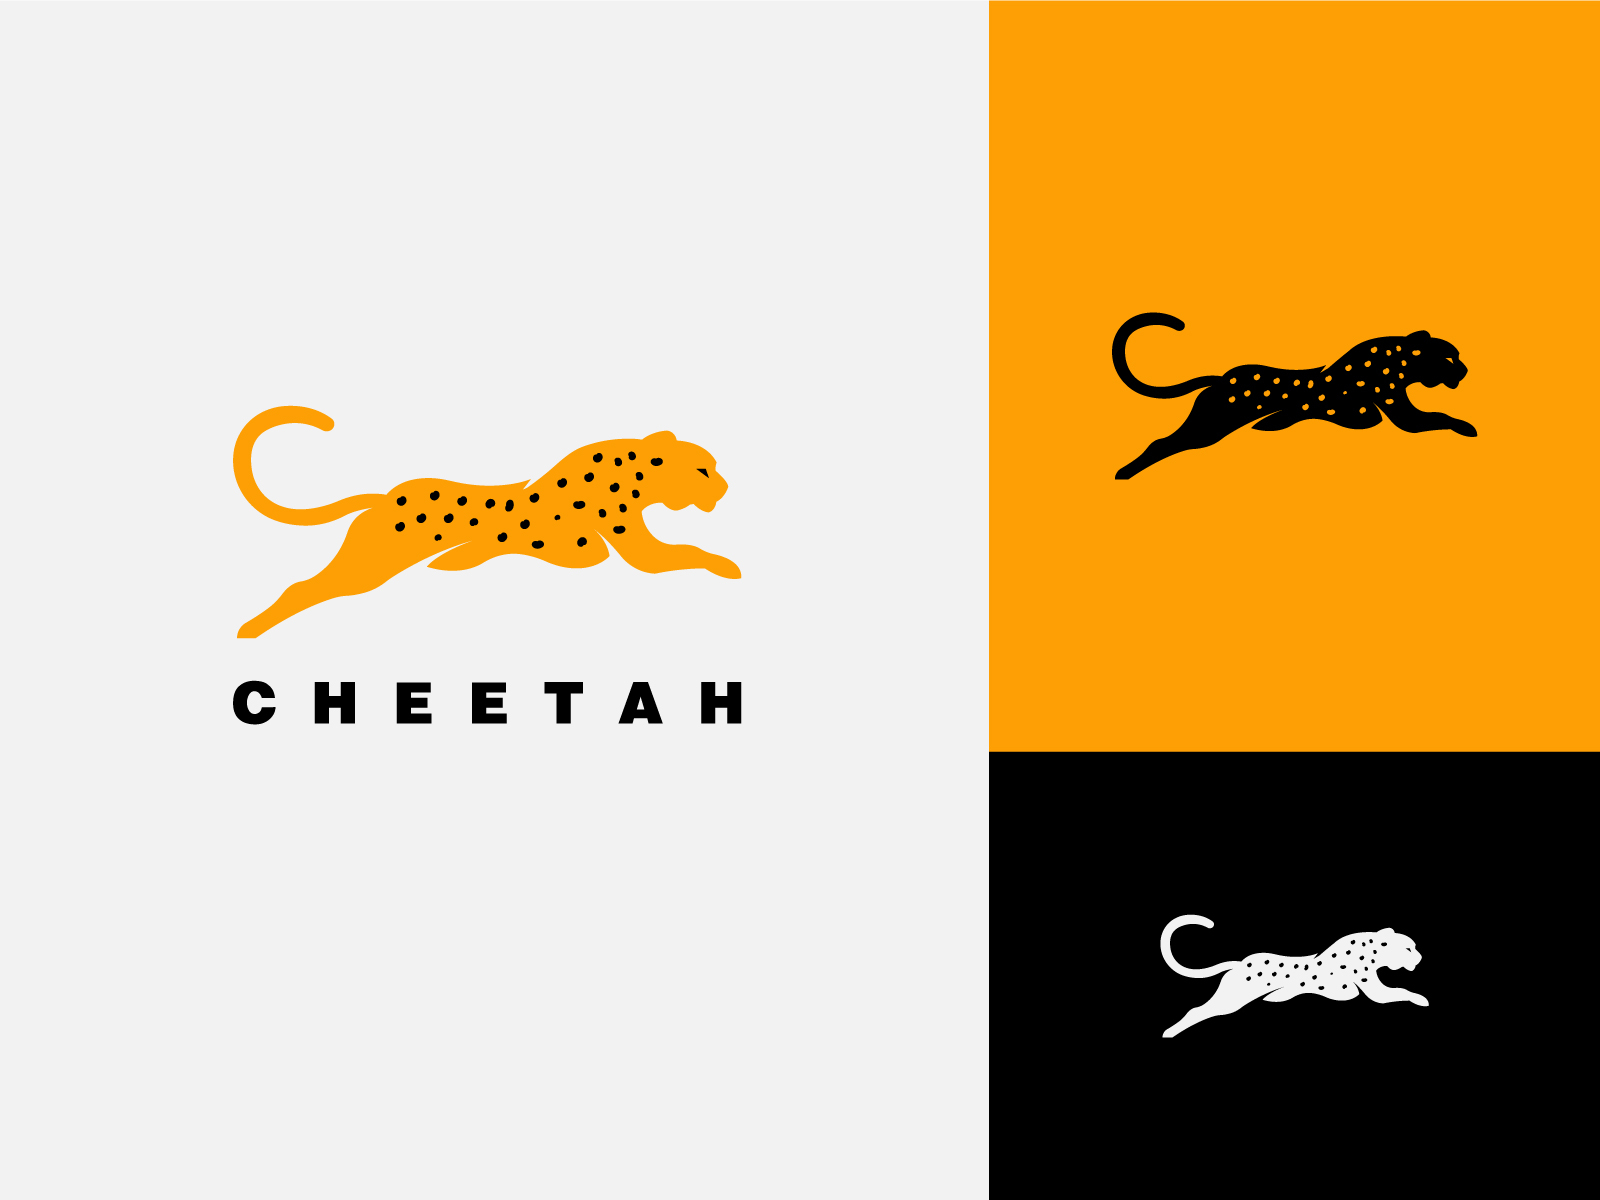 Brand New: New Logo and Identity for Cheetah by Moving Brands